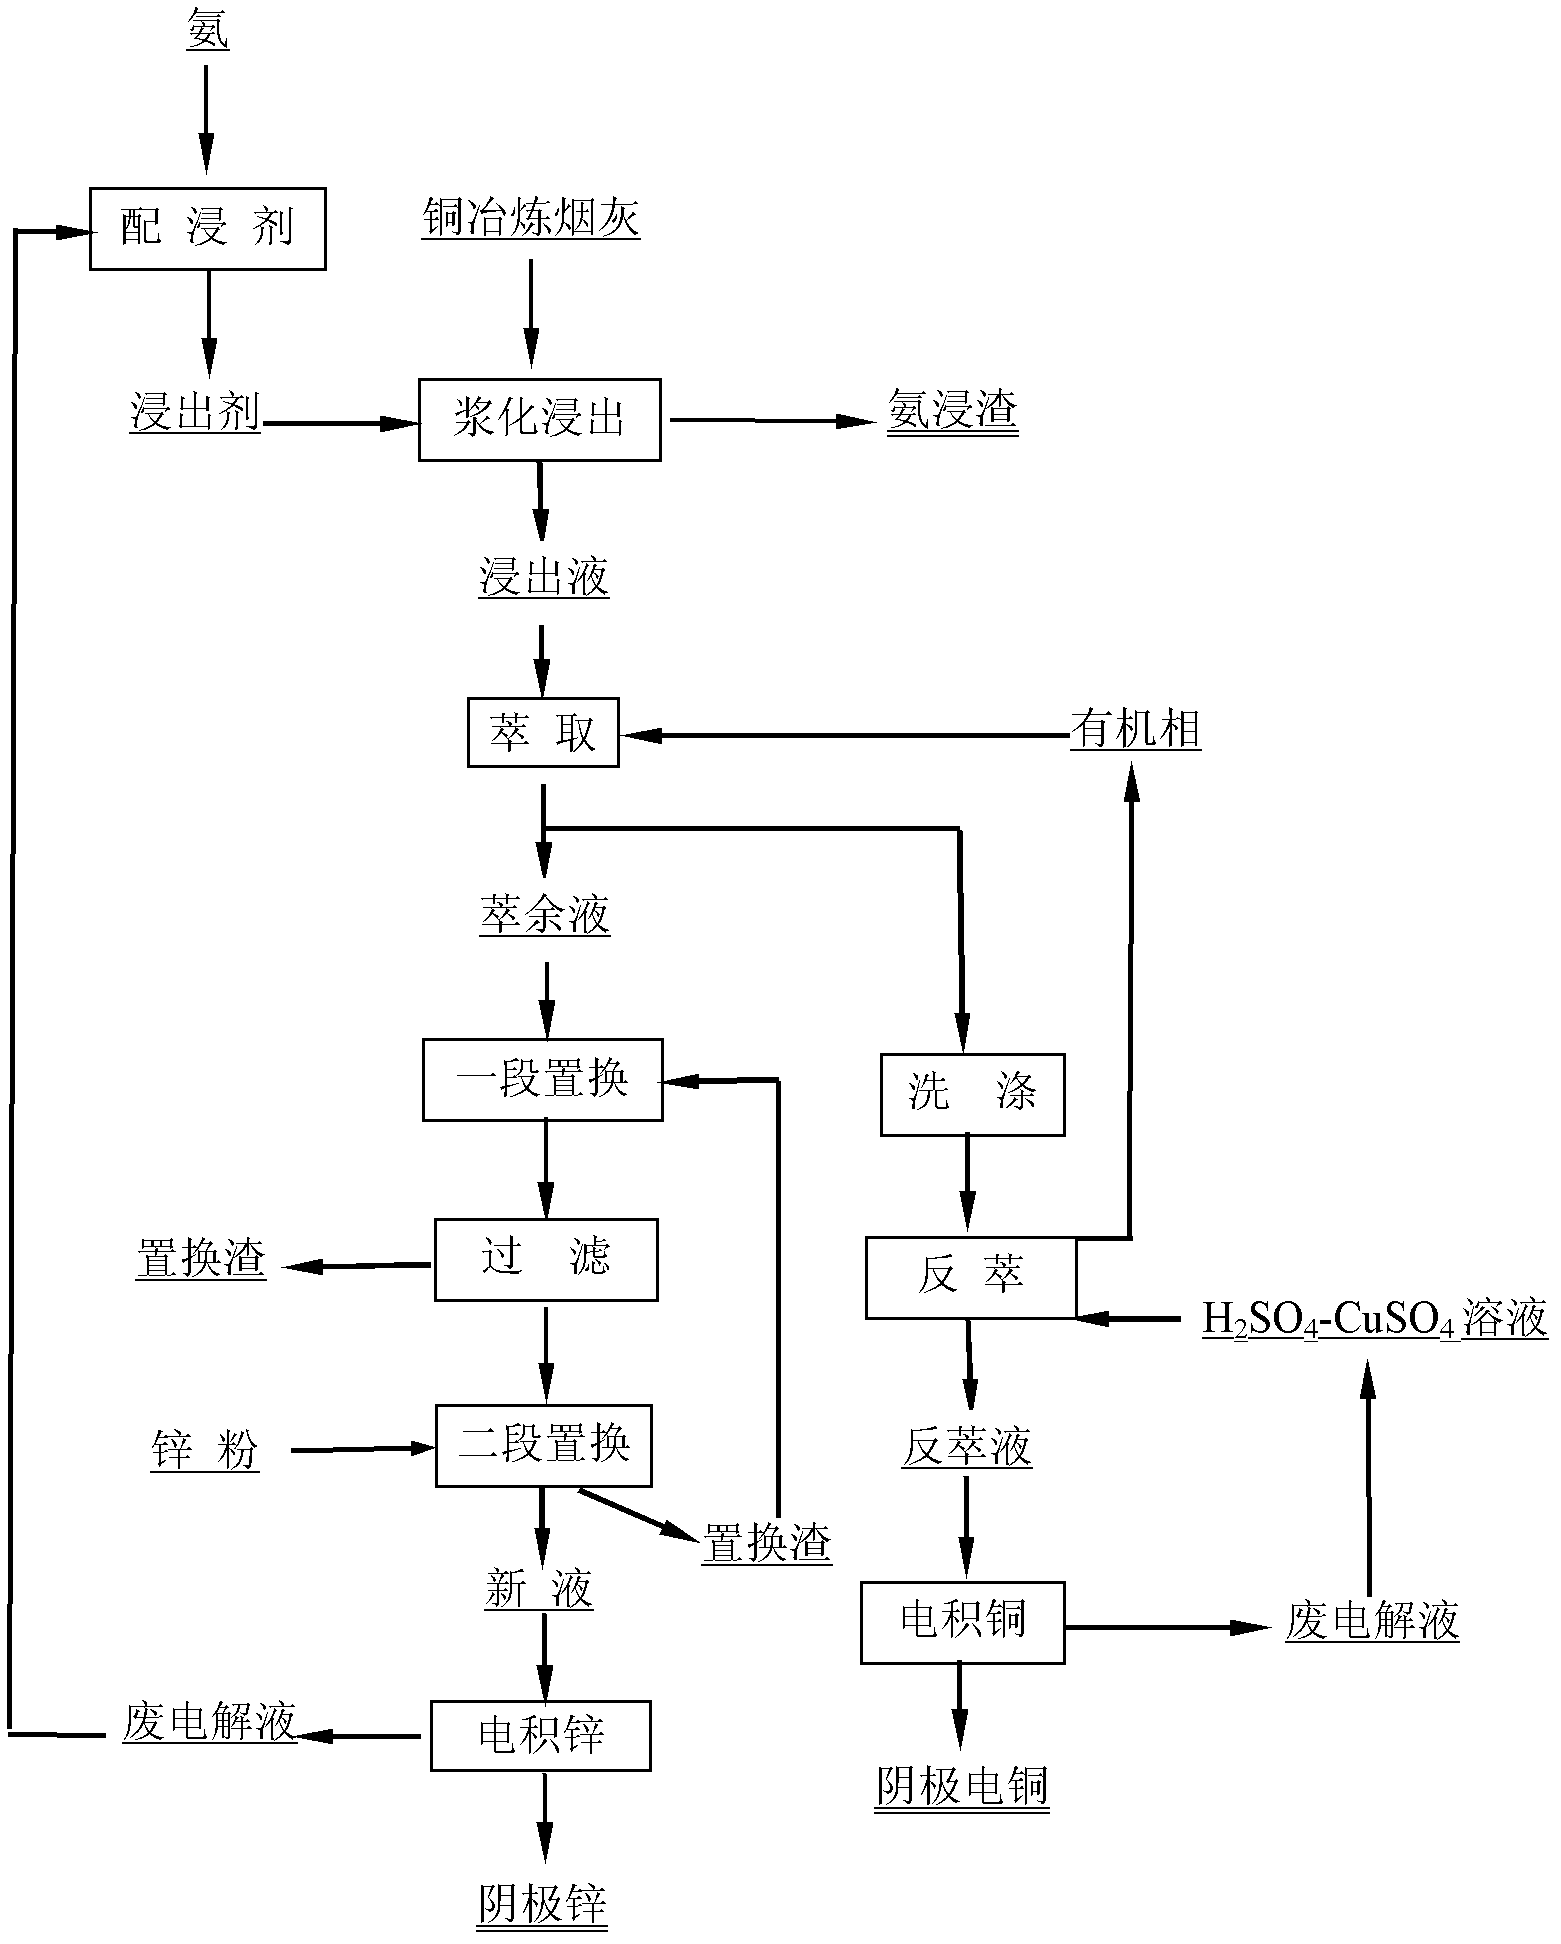 Method for recovering metallic copper and zinc from copper smelting ash